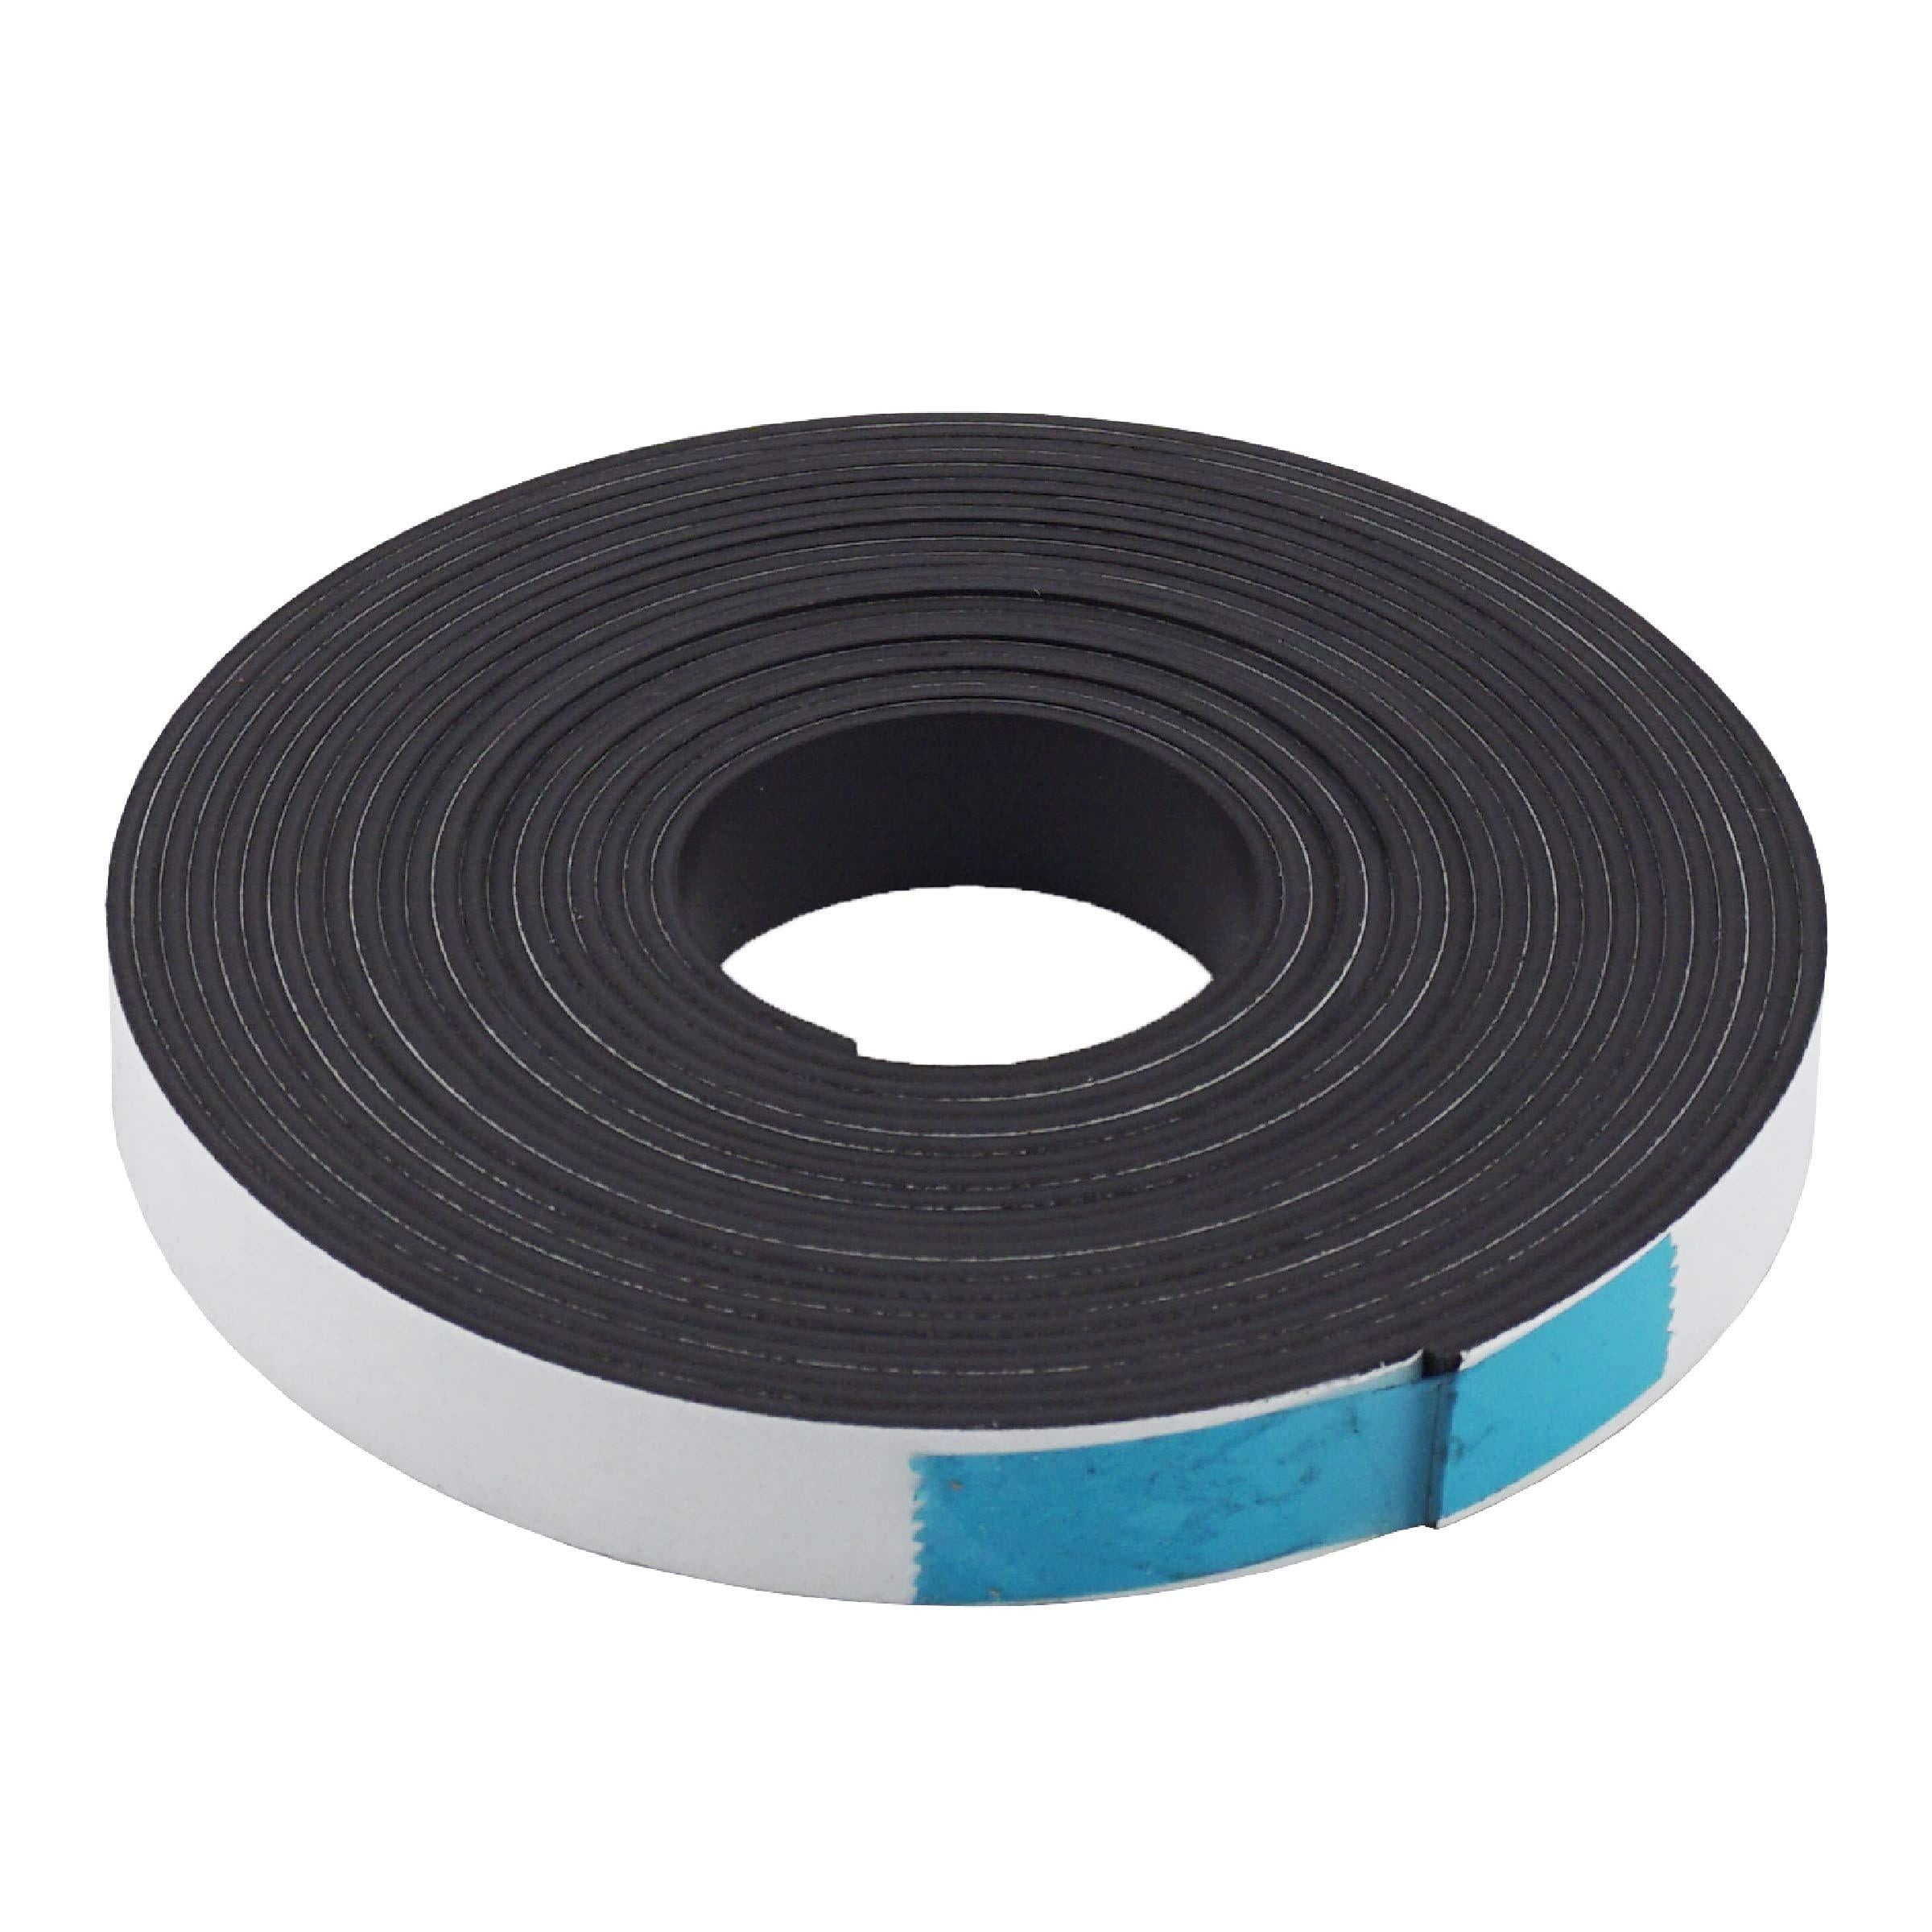 Master Magnet 1/2 in. x 10 ft. Magnetic Tape Roll 96274 - The Home